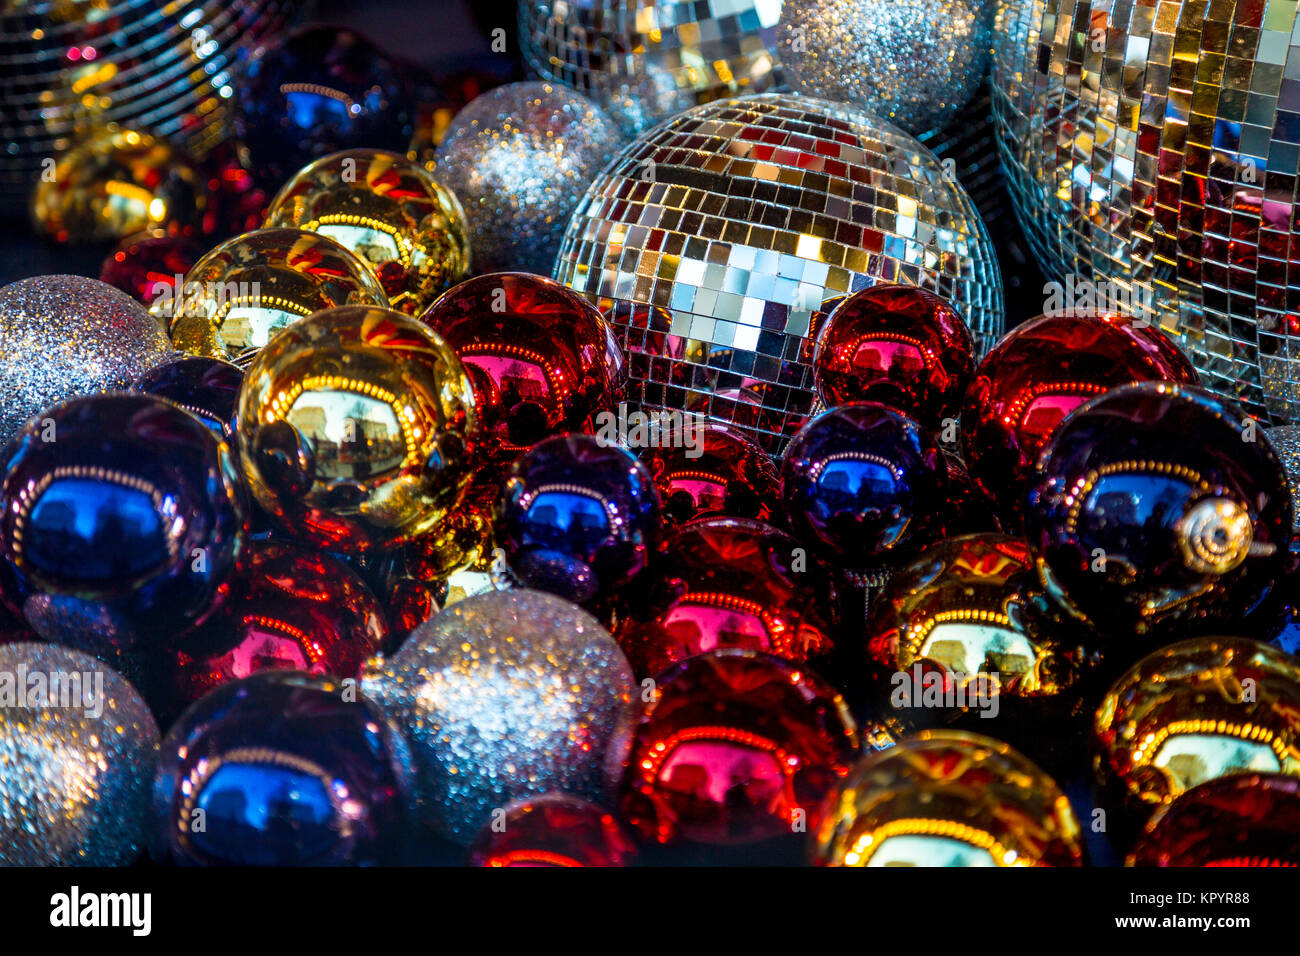 Festive background of shiny colourful Christmas baubles and disco balls Stock Photo